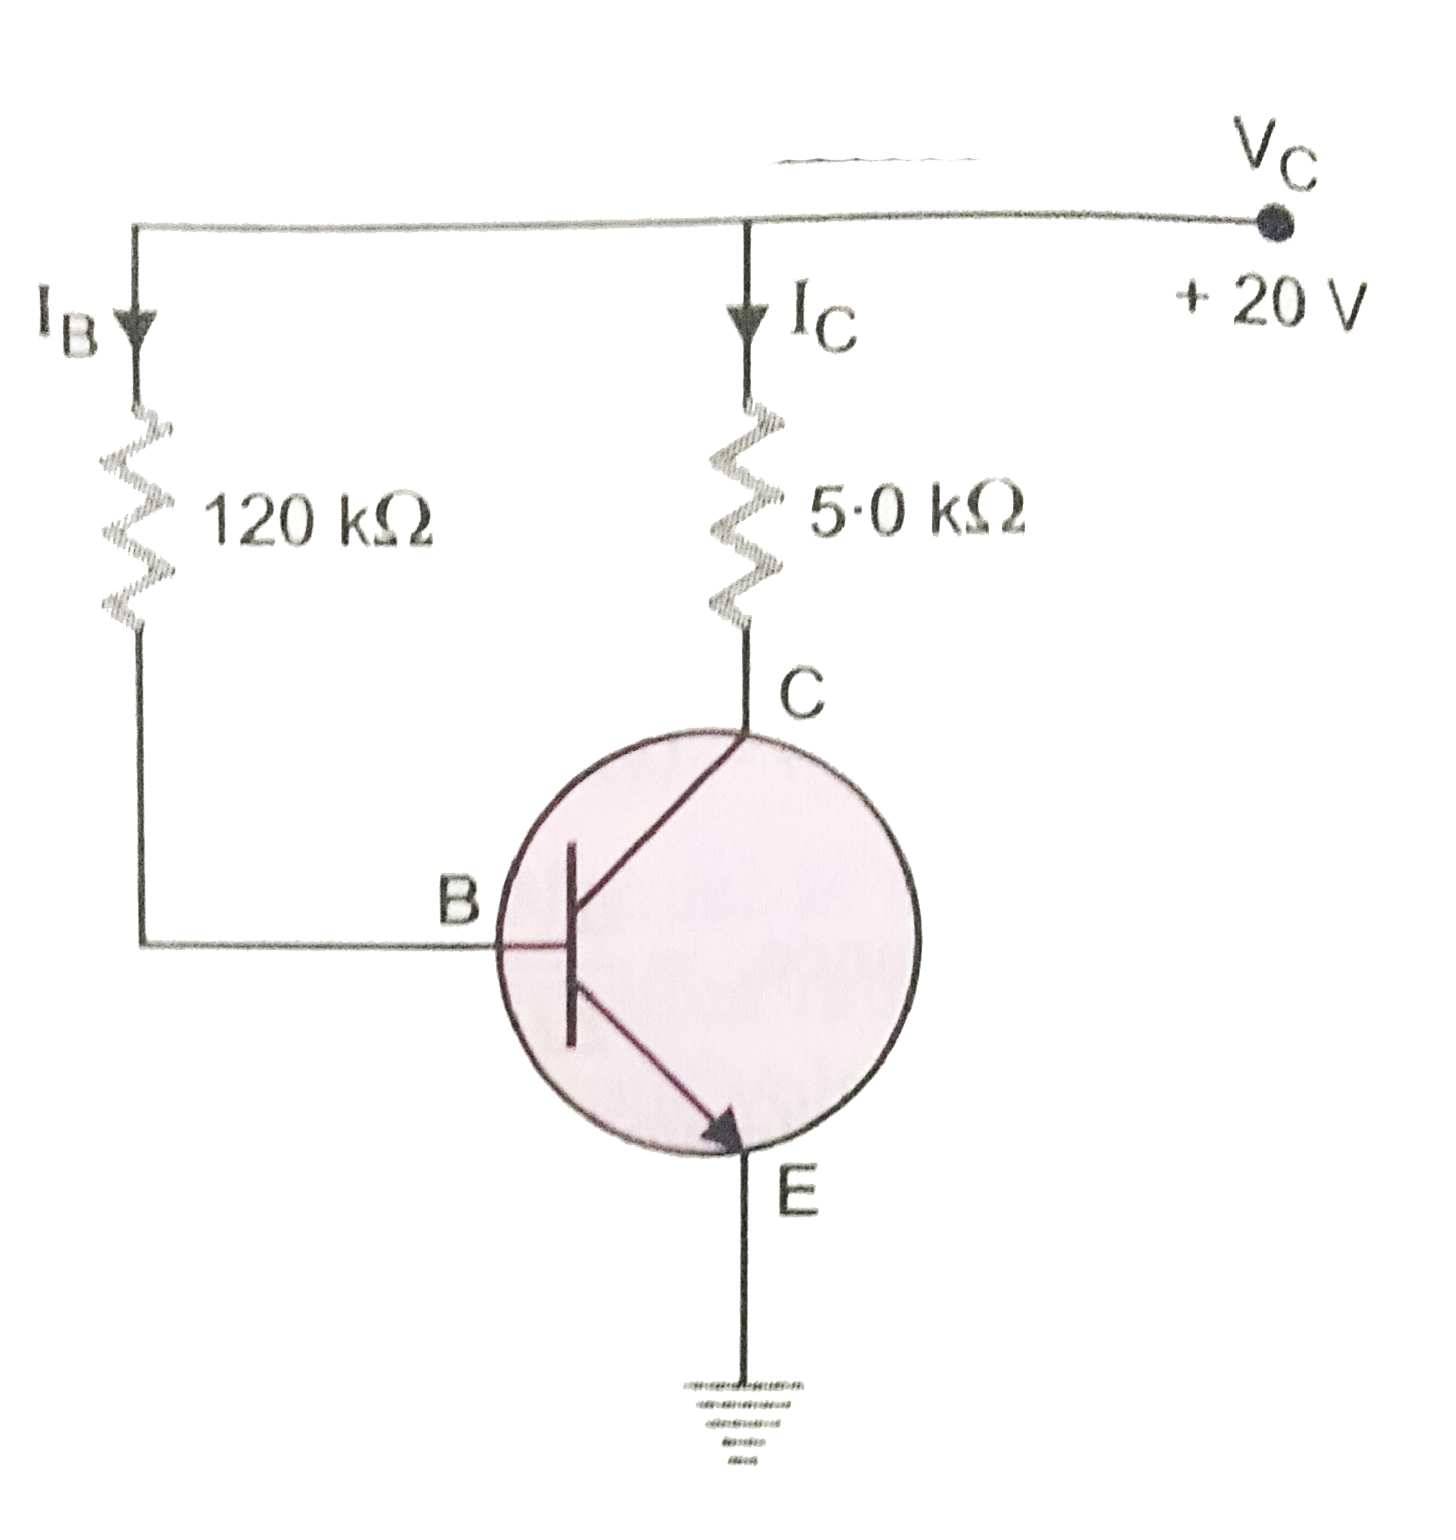 In the circuit Fig. the value of beta is 200. Find I(B), V(CE), V(BE) and V(BC), when I(C)=2.5mA. The transistor is in active, cut off or saturation state.